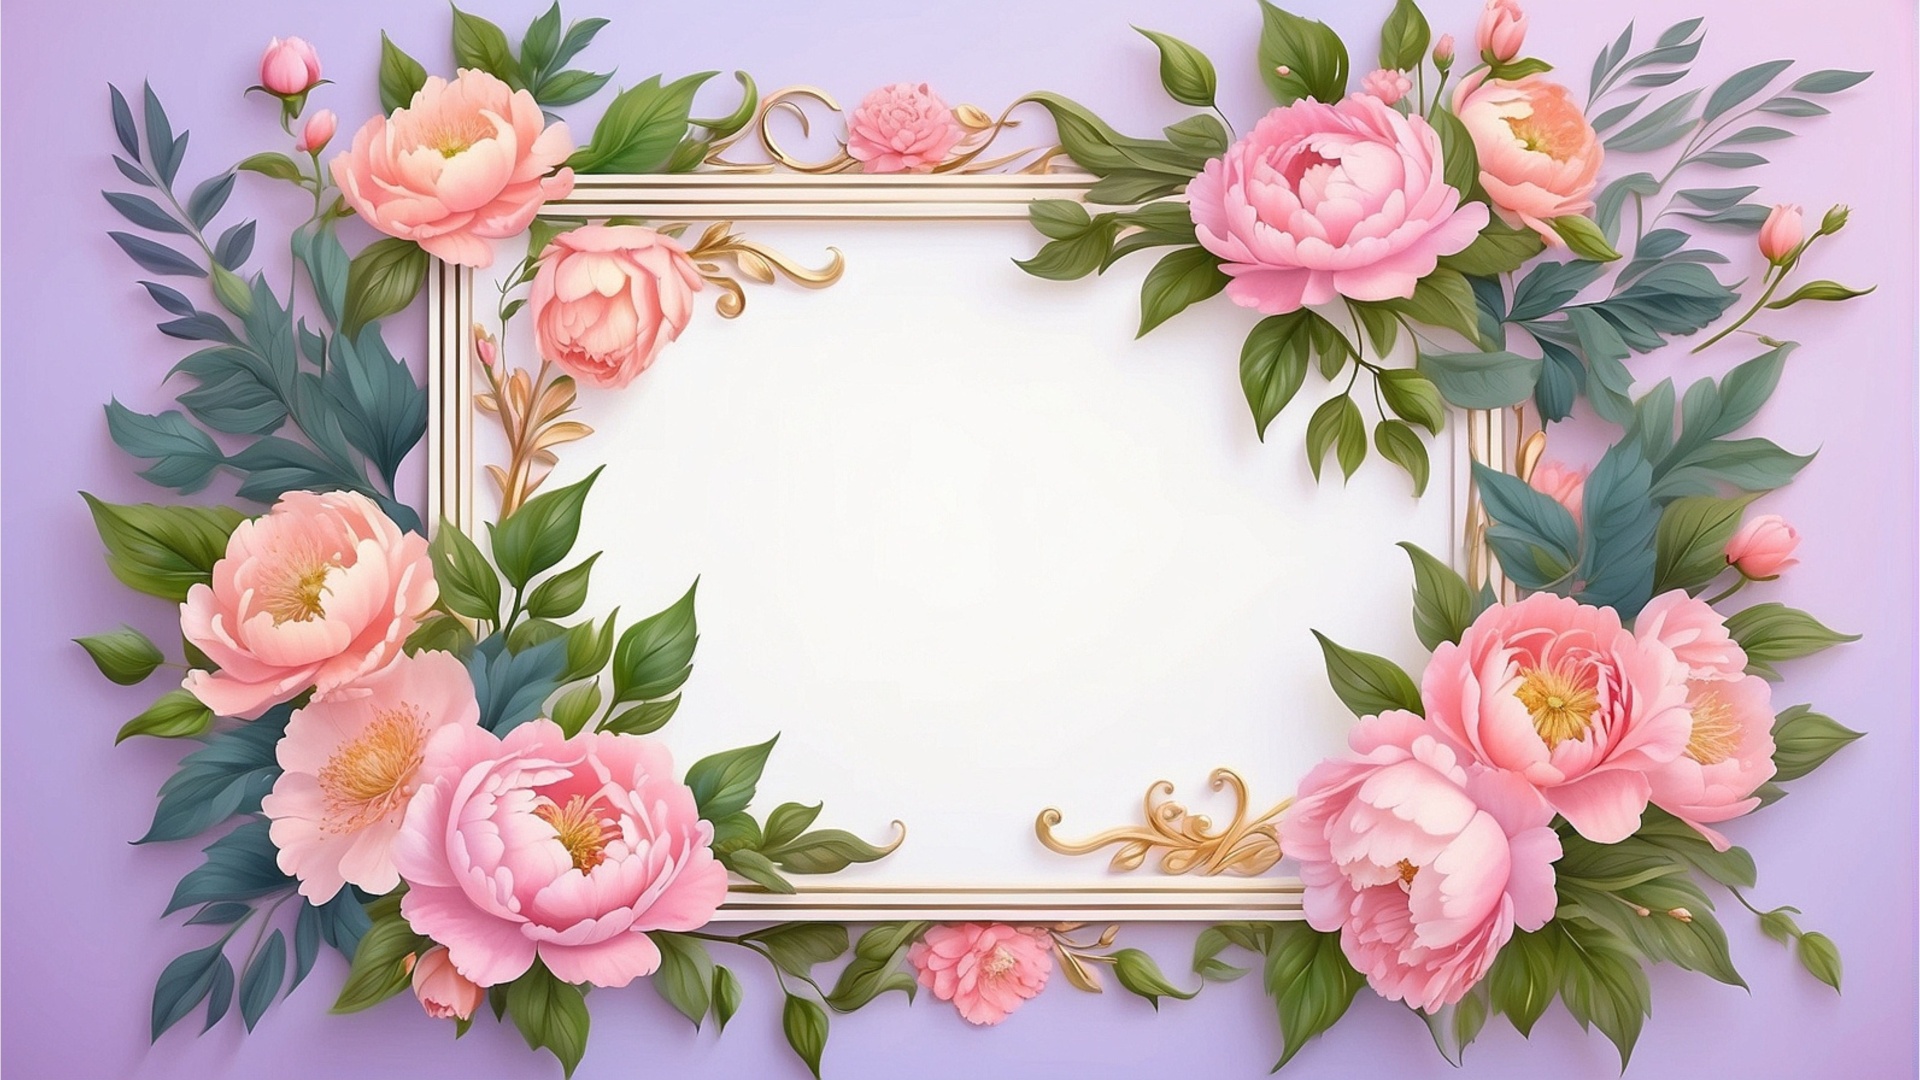 Vintage Frame With Peony Flowers